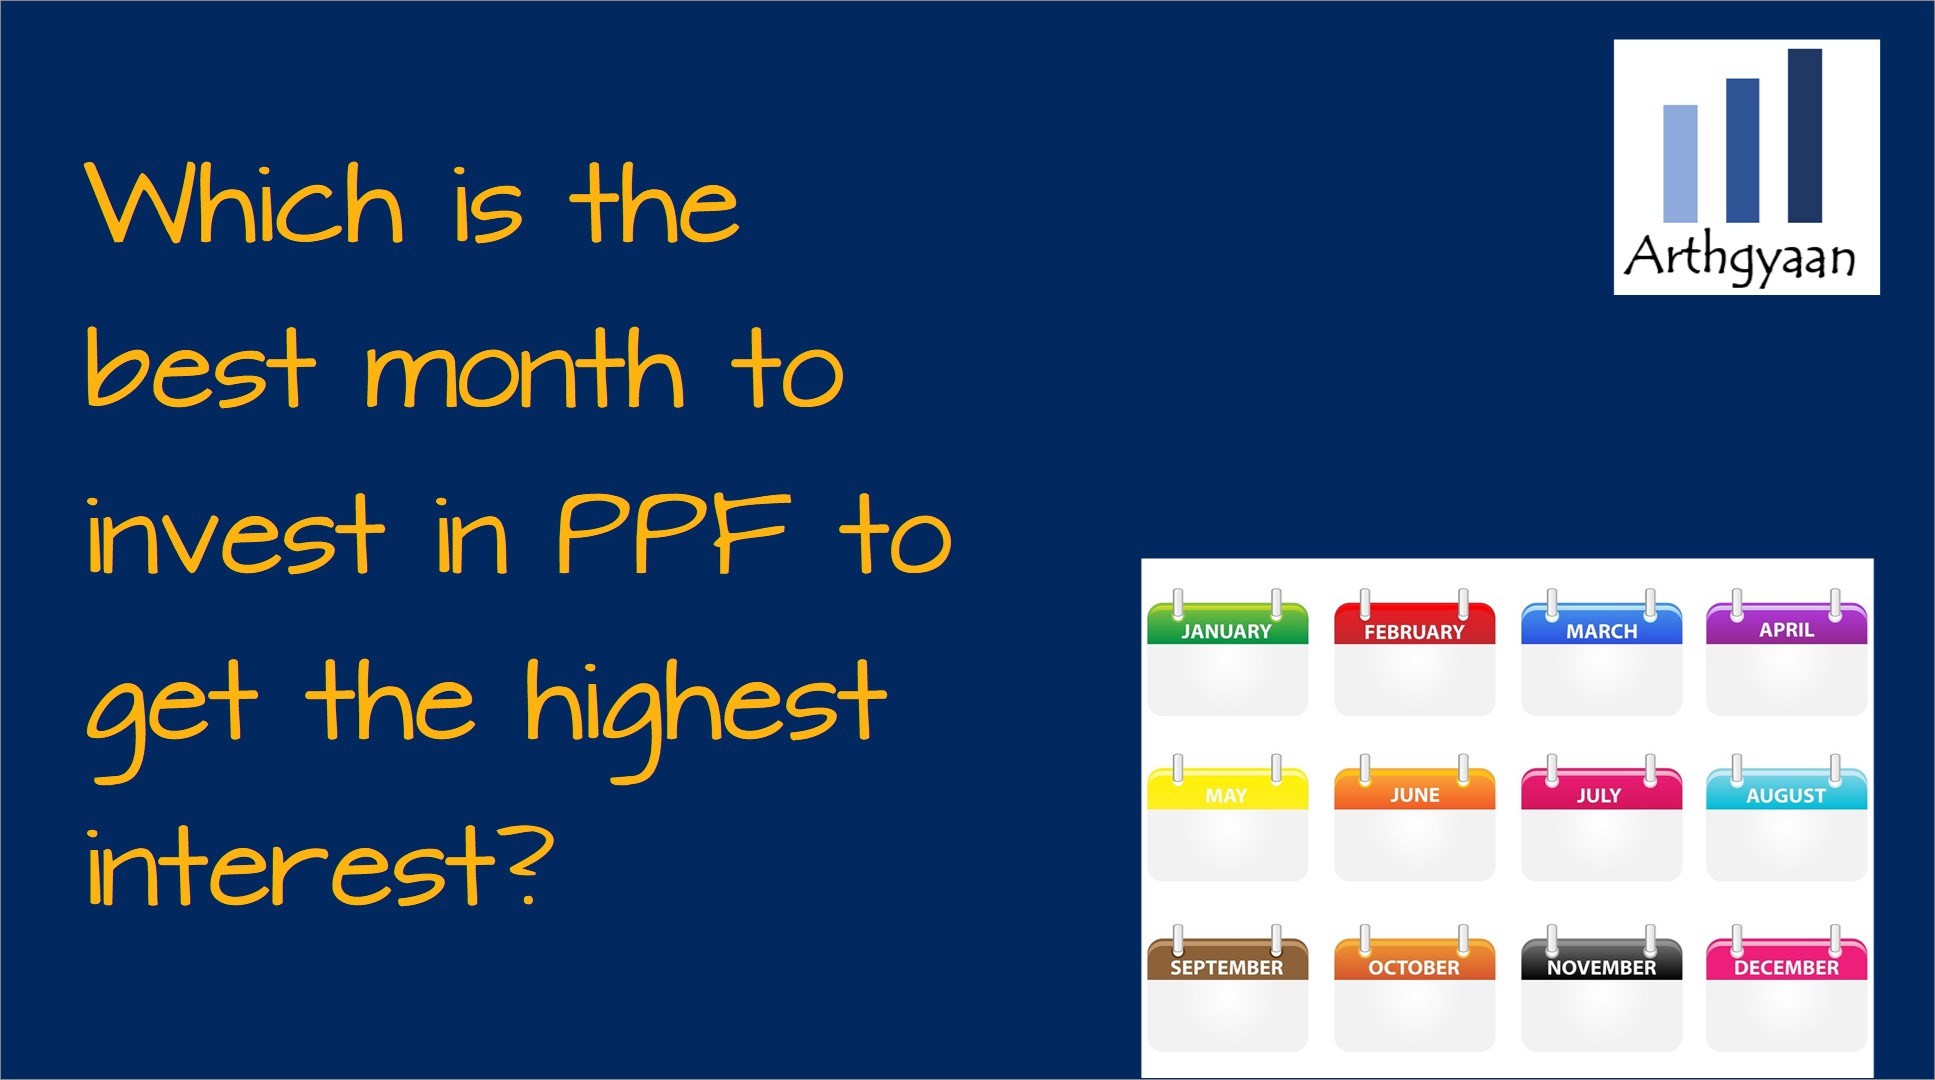 Which is the best month to invest in PPF to get the highest interest?